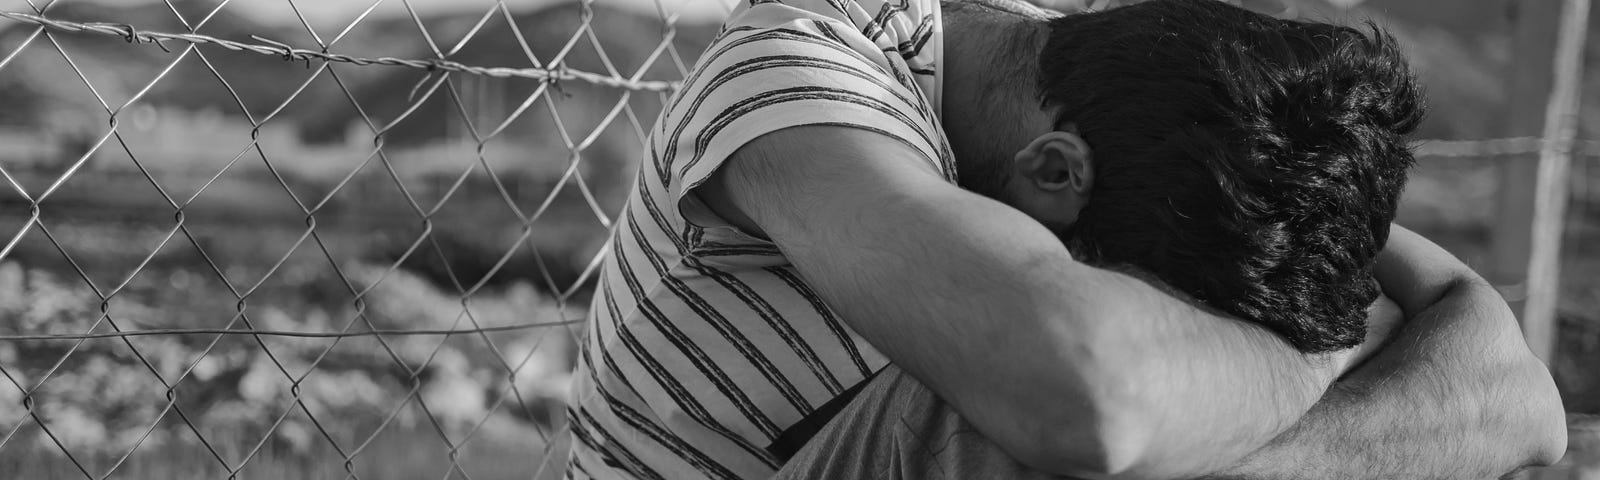 Man wearing striped t-shirt and jeans, sitting before chain link fenced pasture, arms crossed over knees, head bowed. Black and white photo.